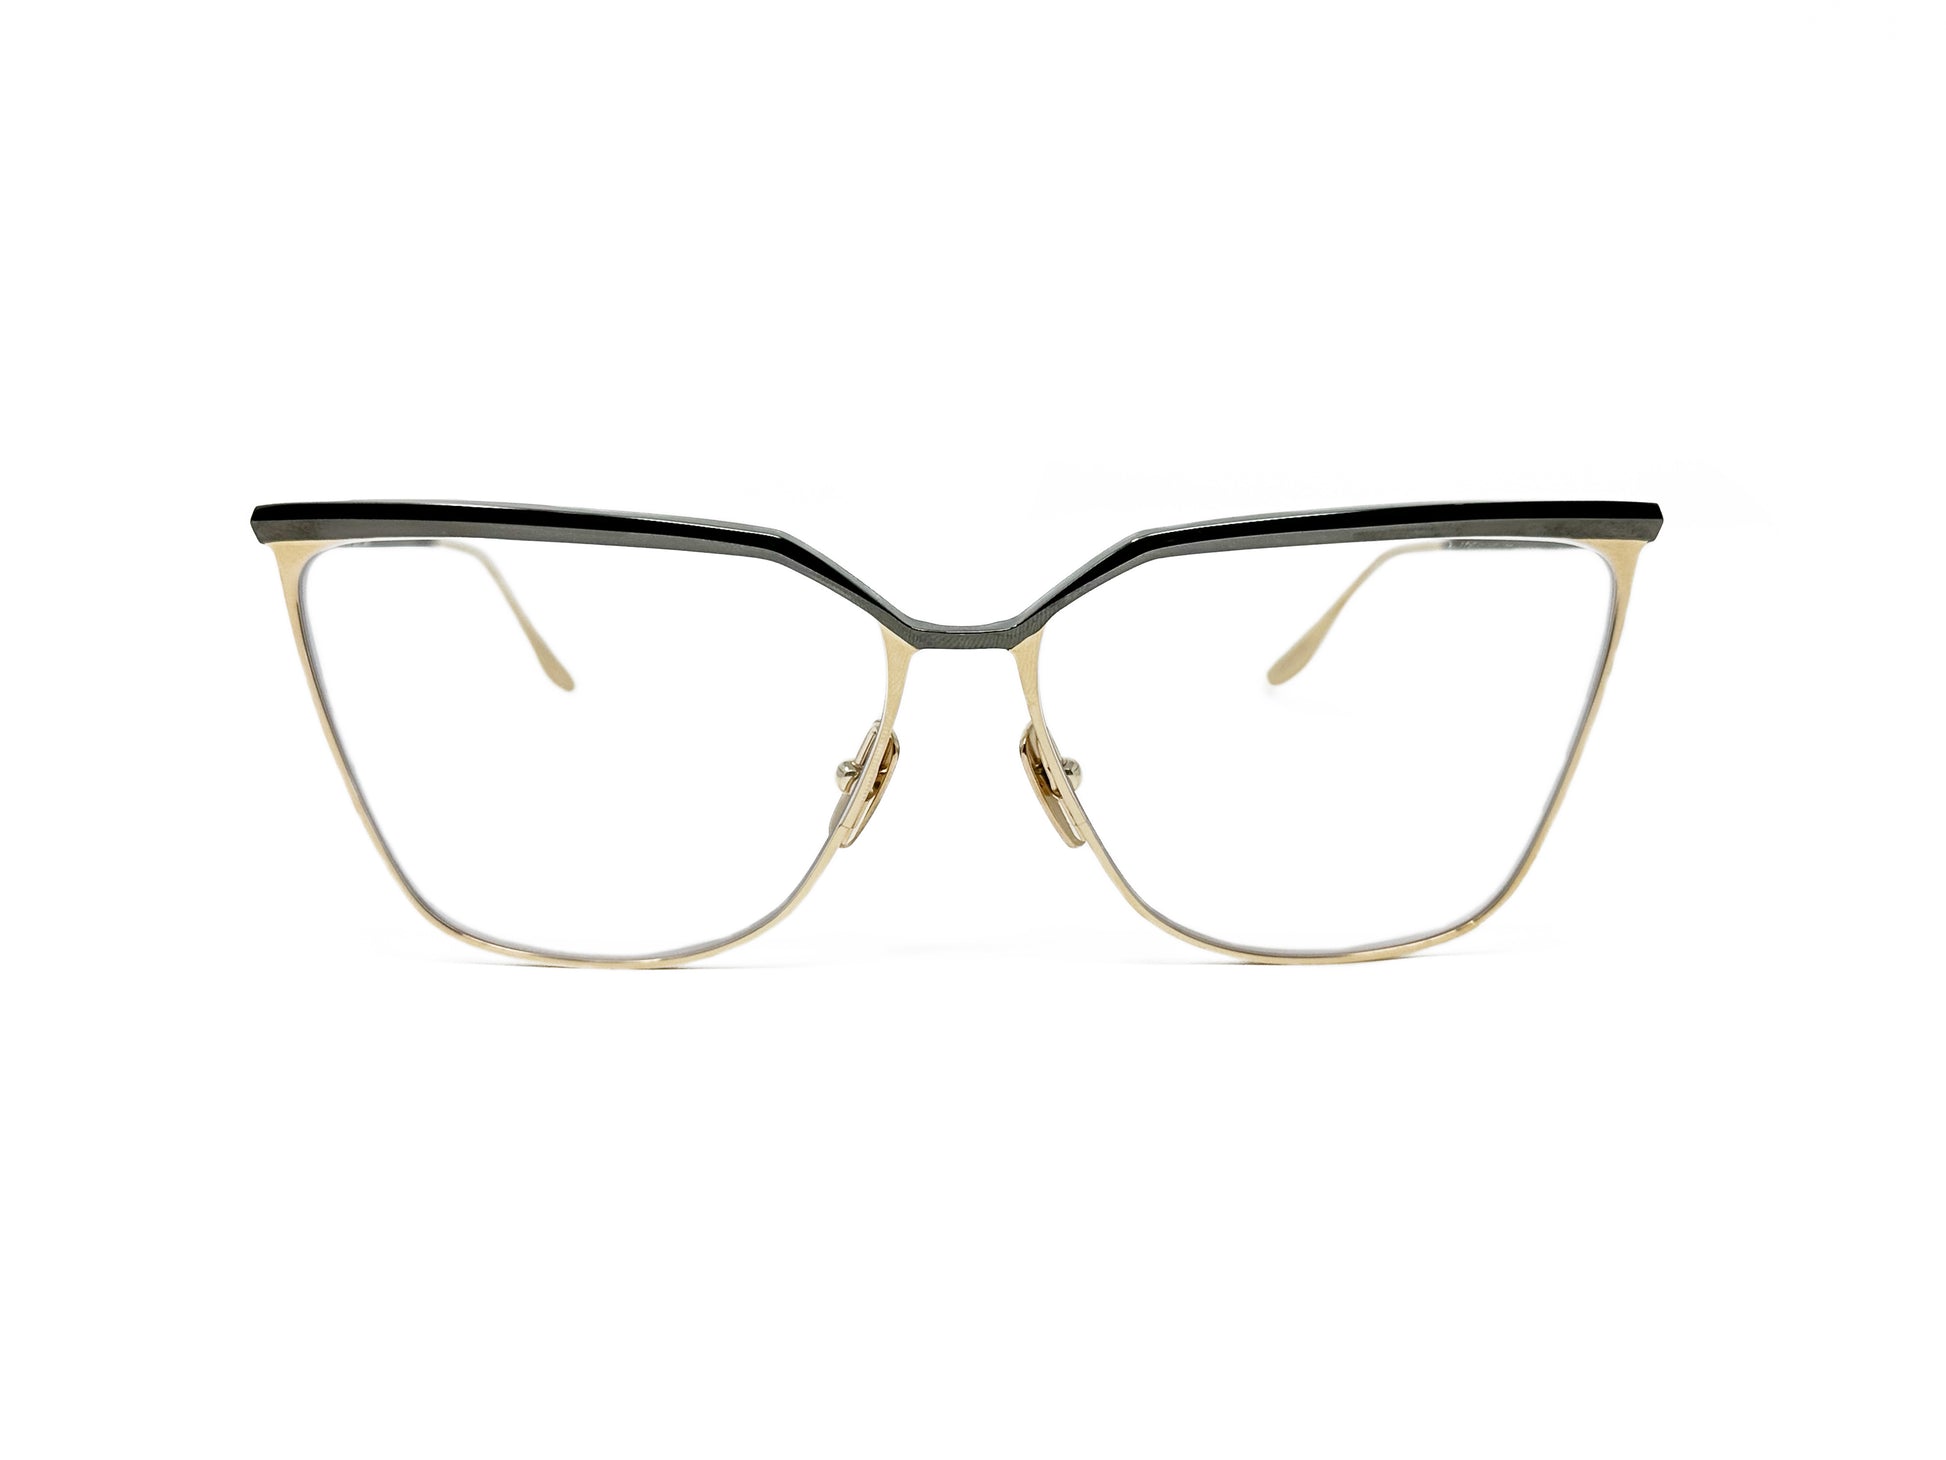 Dita Eyewear metal, angular, cat-eye optical frame. Model: Ravitte. Color: 03 -Gold with a silver trim on top. Front view. 